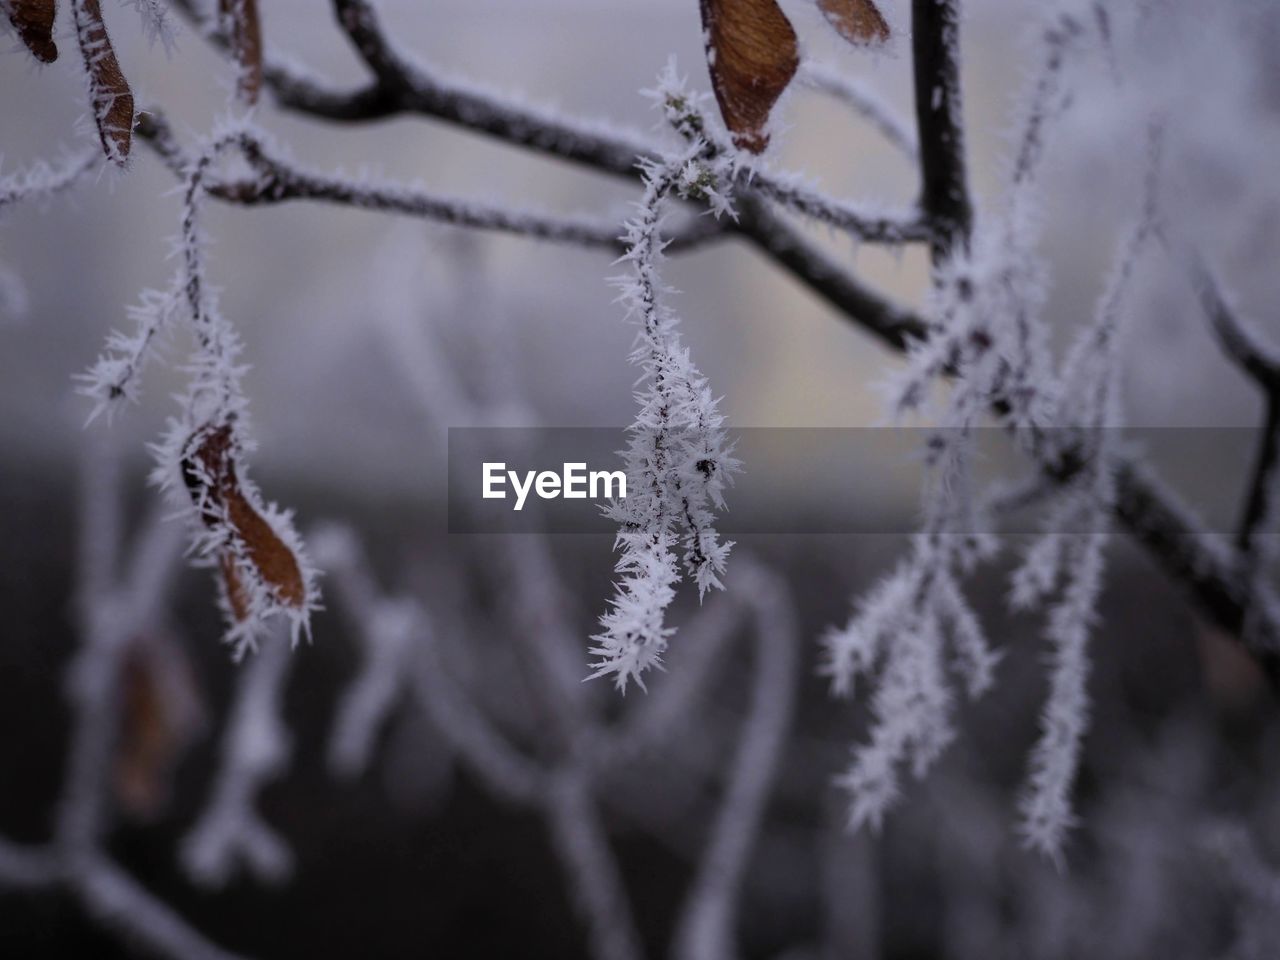 frost, winter, cold temperature, snow, branch, nature, freezing, ice, plant, frozen, no people, tree, twig, close-up, focus on foreground, leaf, beauty in nature, macro photography, selective focus, outdoors, environment, day, snowflake, tranquility, white